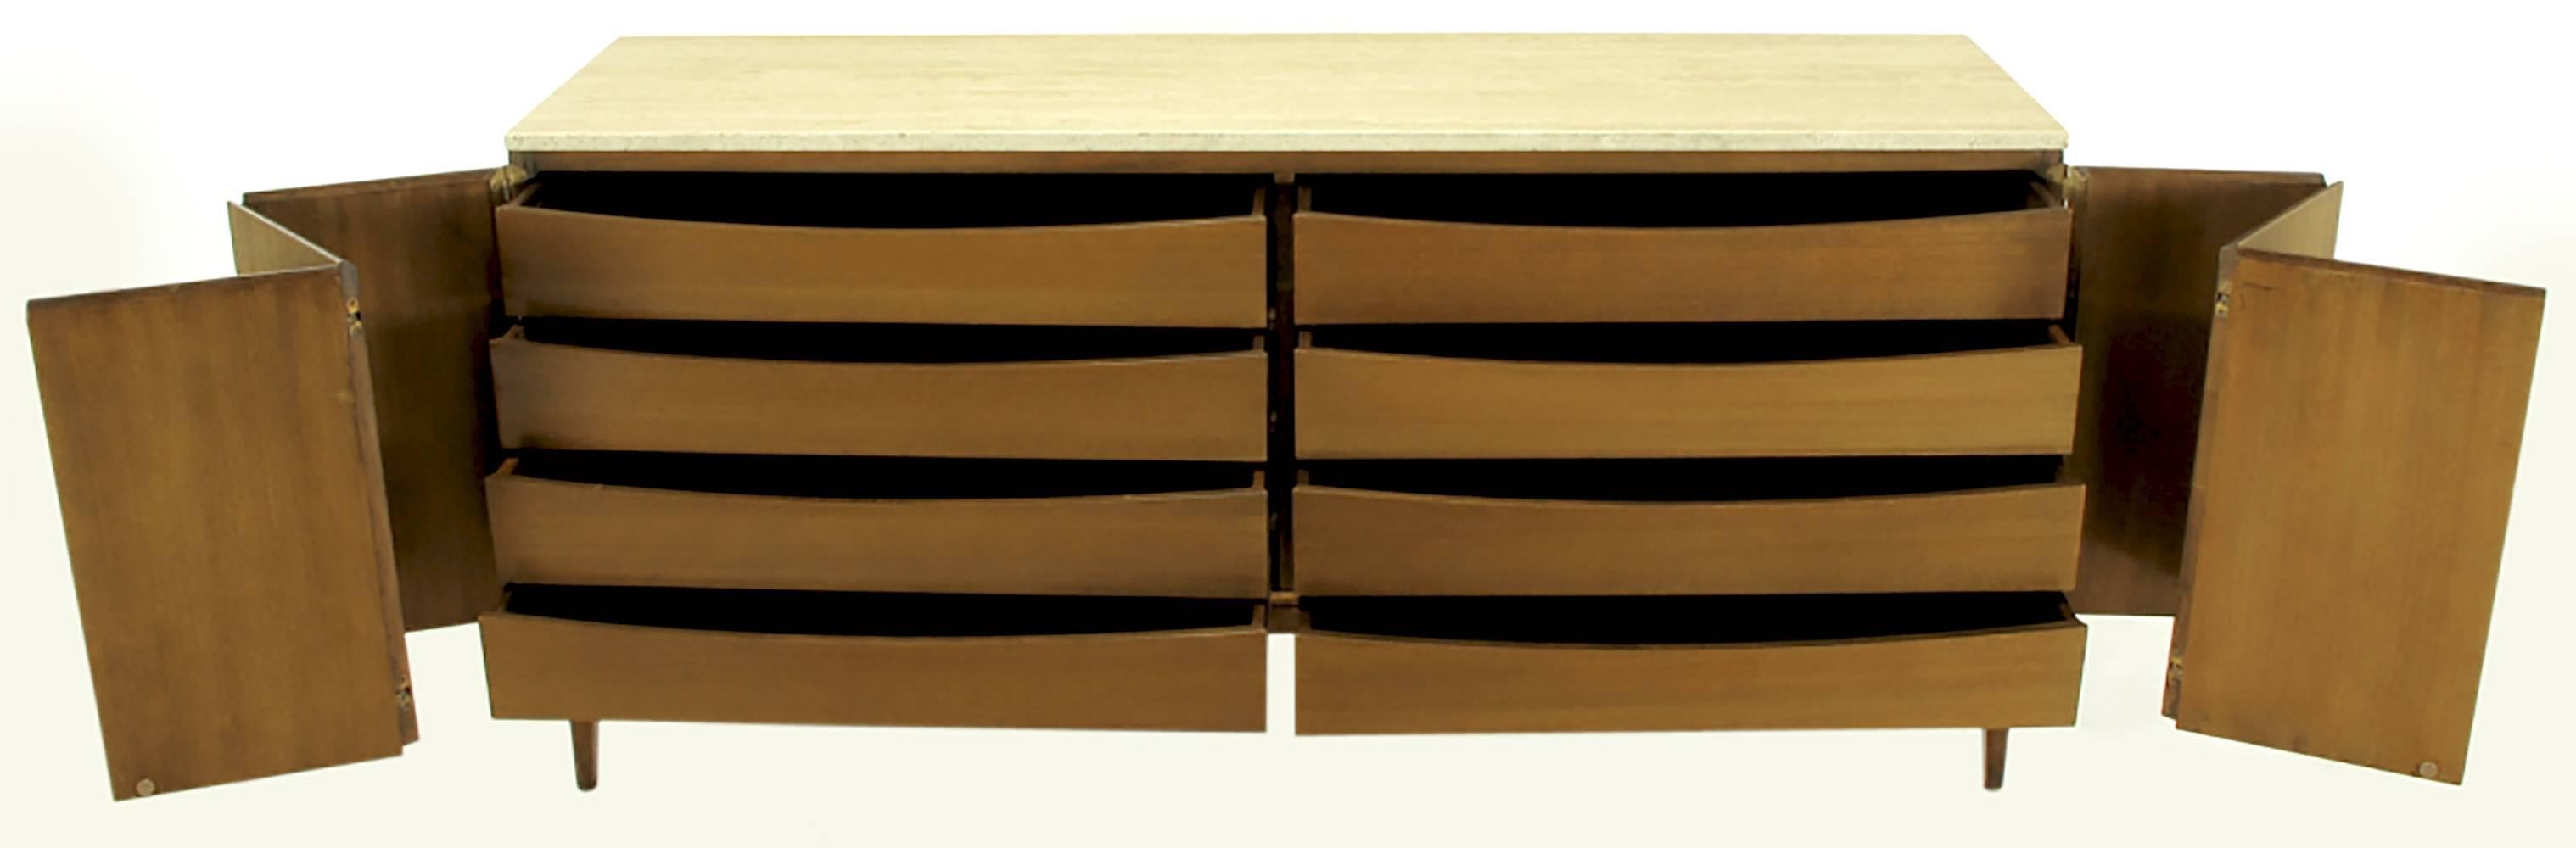 Mid-20th Century Paul McCobb for Calvin Mahogany and Travertine Dresser with Dual Tri-Fold Doors For Sale